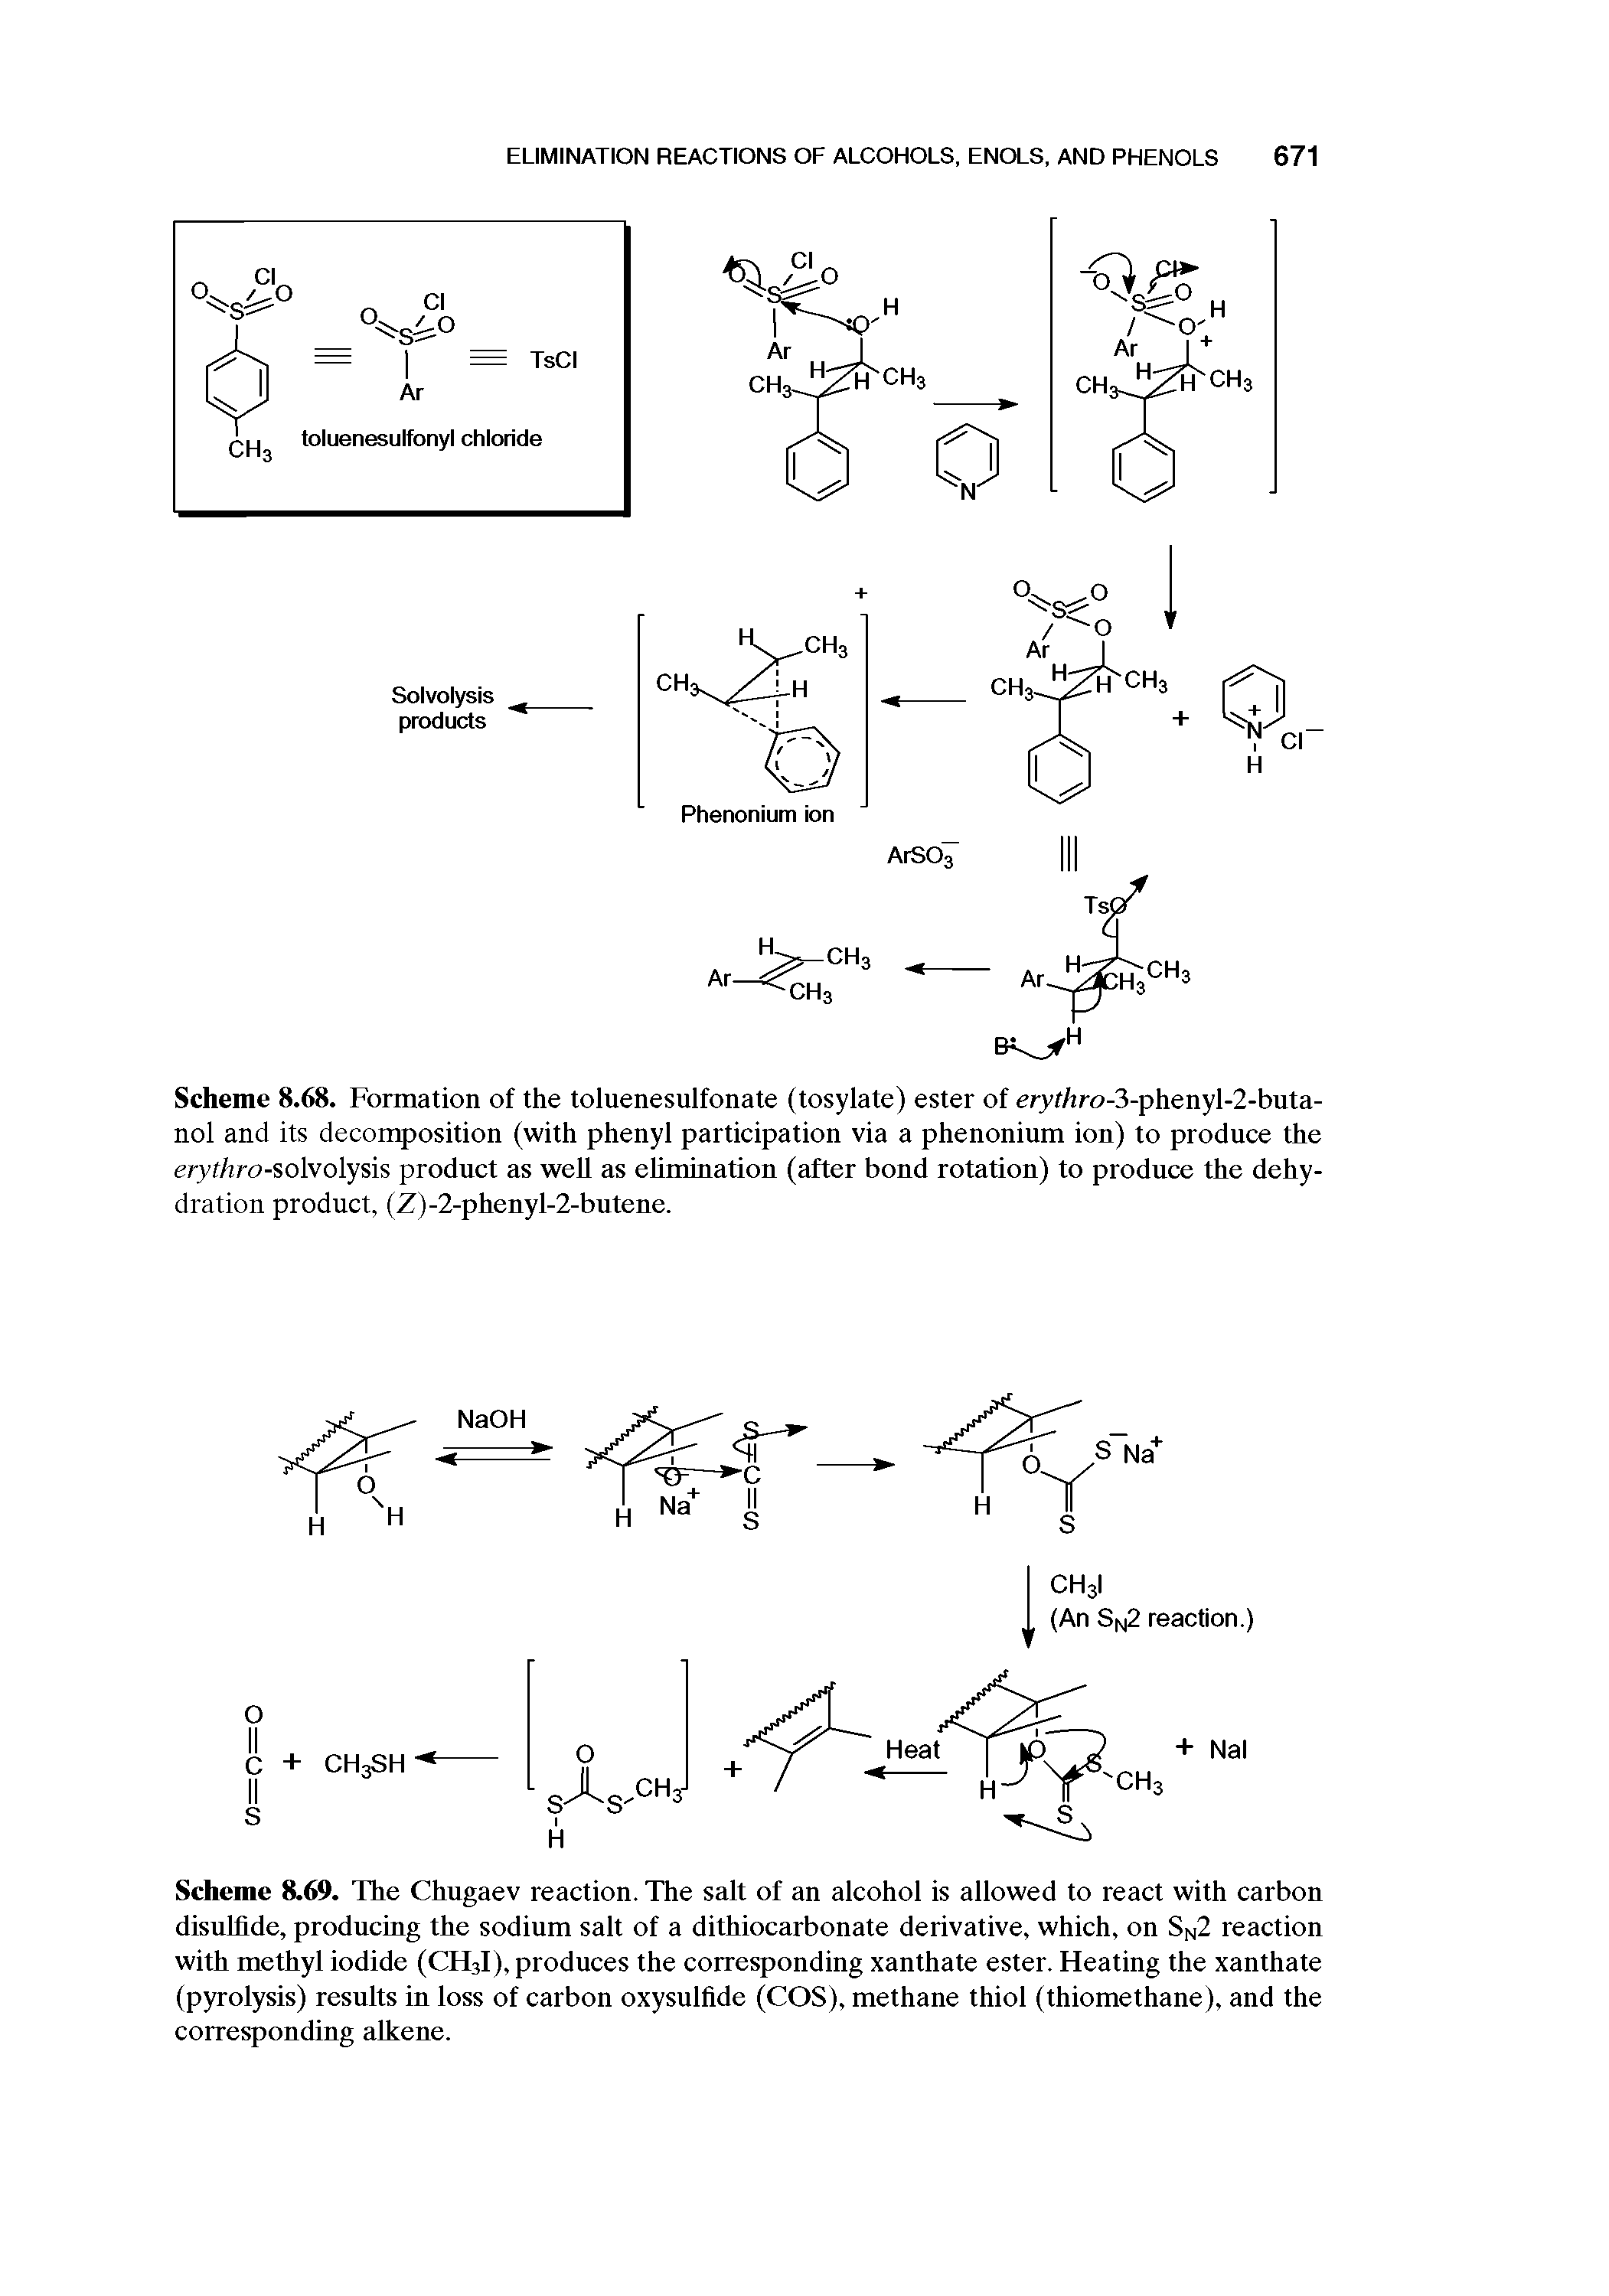 Scheme 8.69. The Chugaev reaction. The salt of an alcohol is allowed to react with carbon disulfide, producing the sodium salt of a dithiocarbonate derivative, which, on Sn2 reaction with methyl iodide (CH3I), produces the corresponding xanthate ester. Heating the xanthate (pyrolysis) results in loss of carbon oxysulfide (COS), methane thiol (thiomethane), and the corresponding alkene.